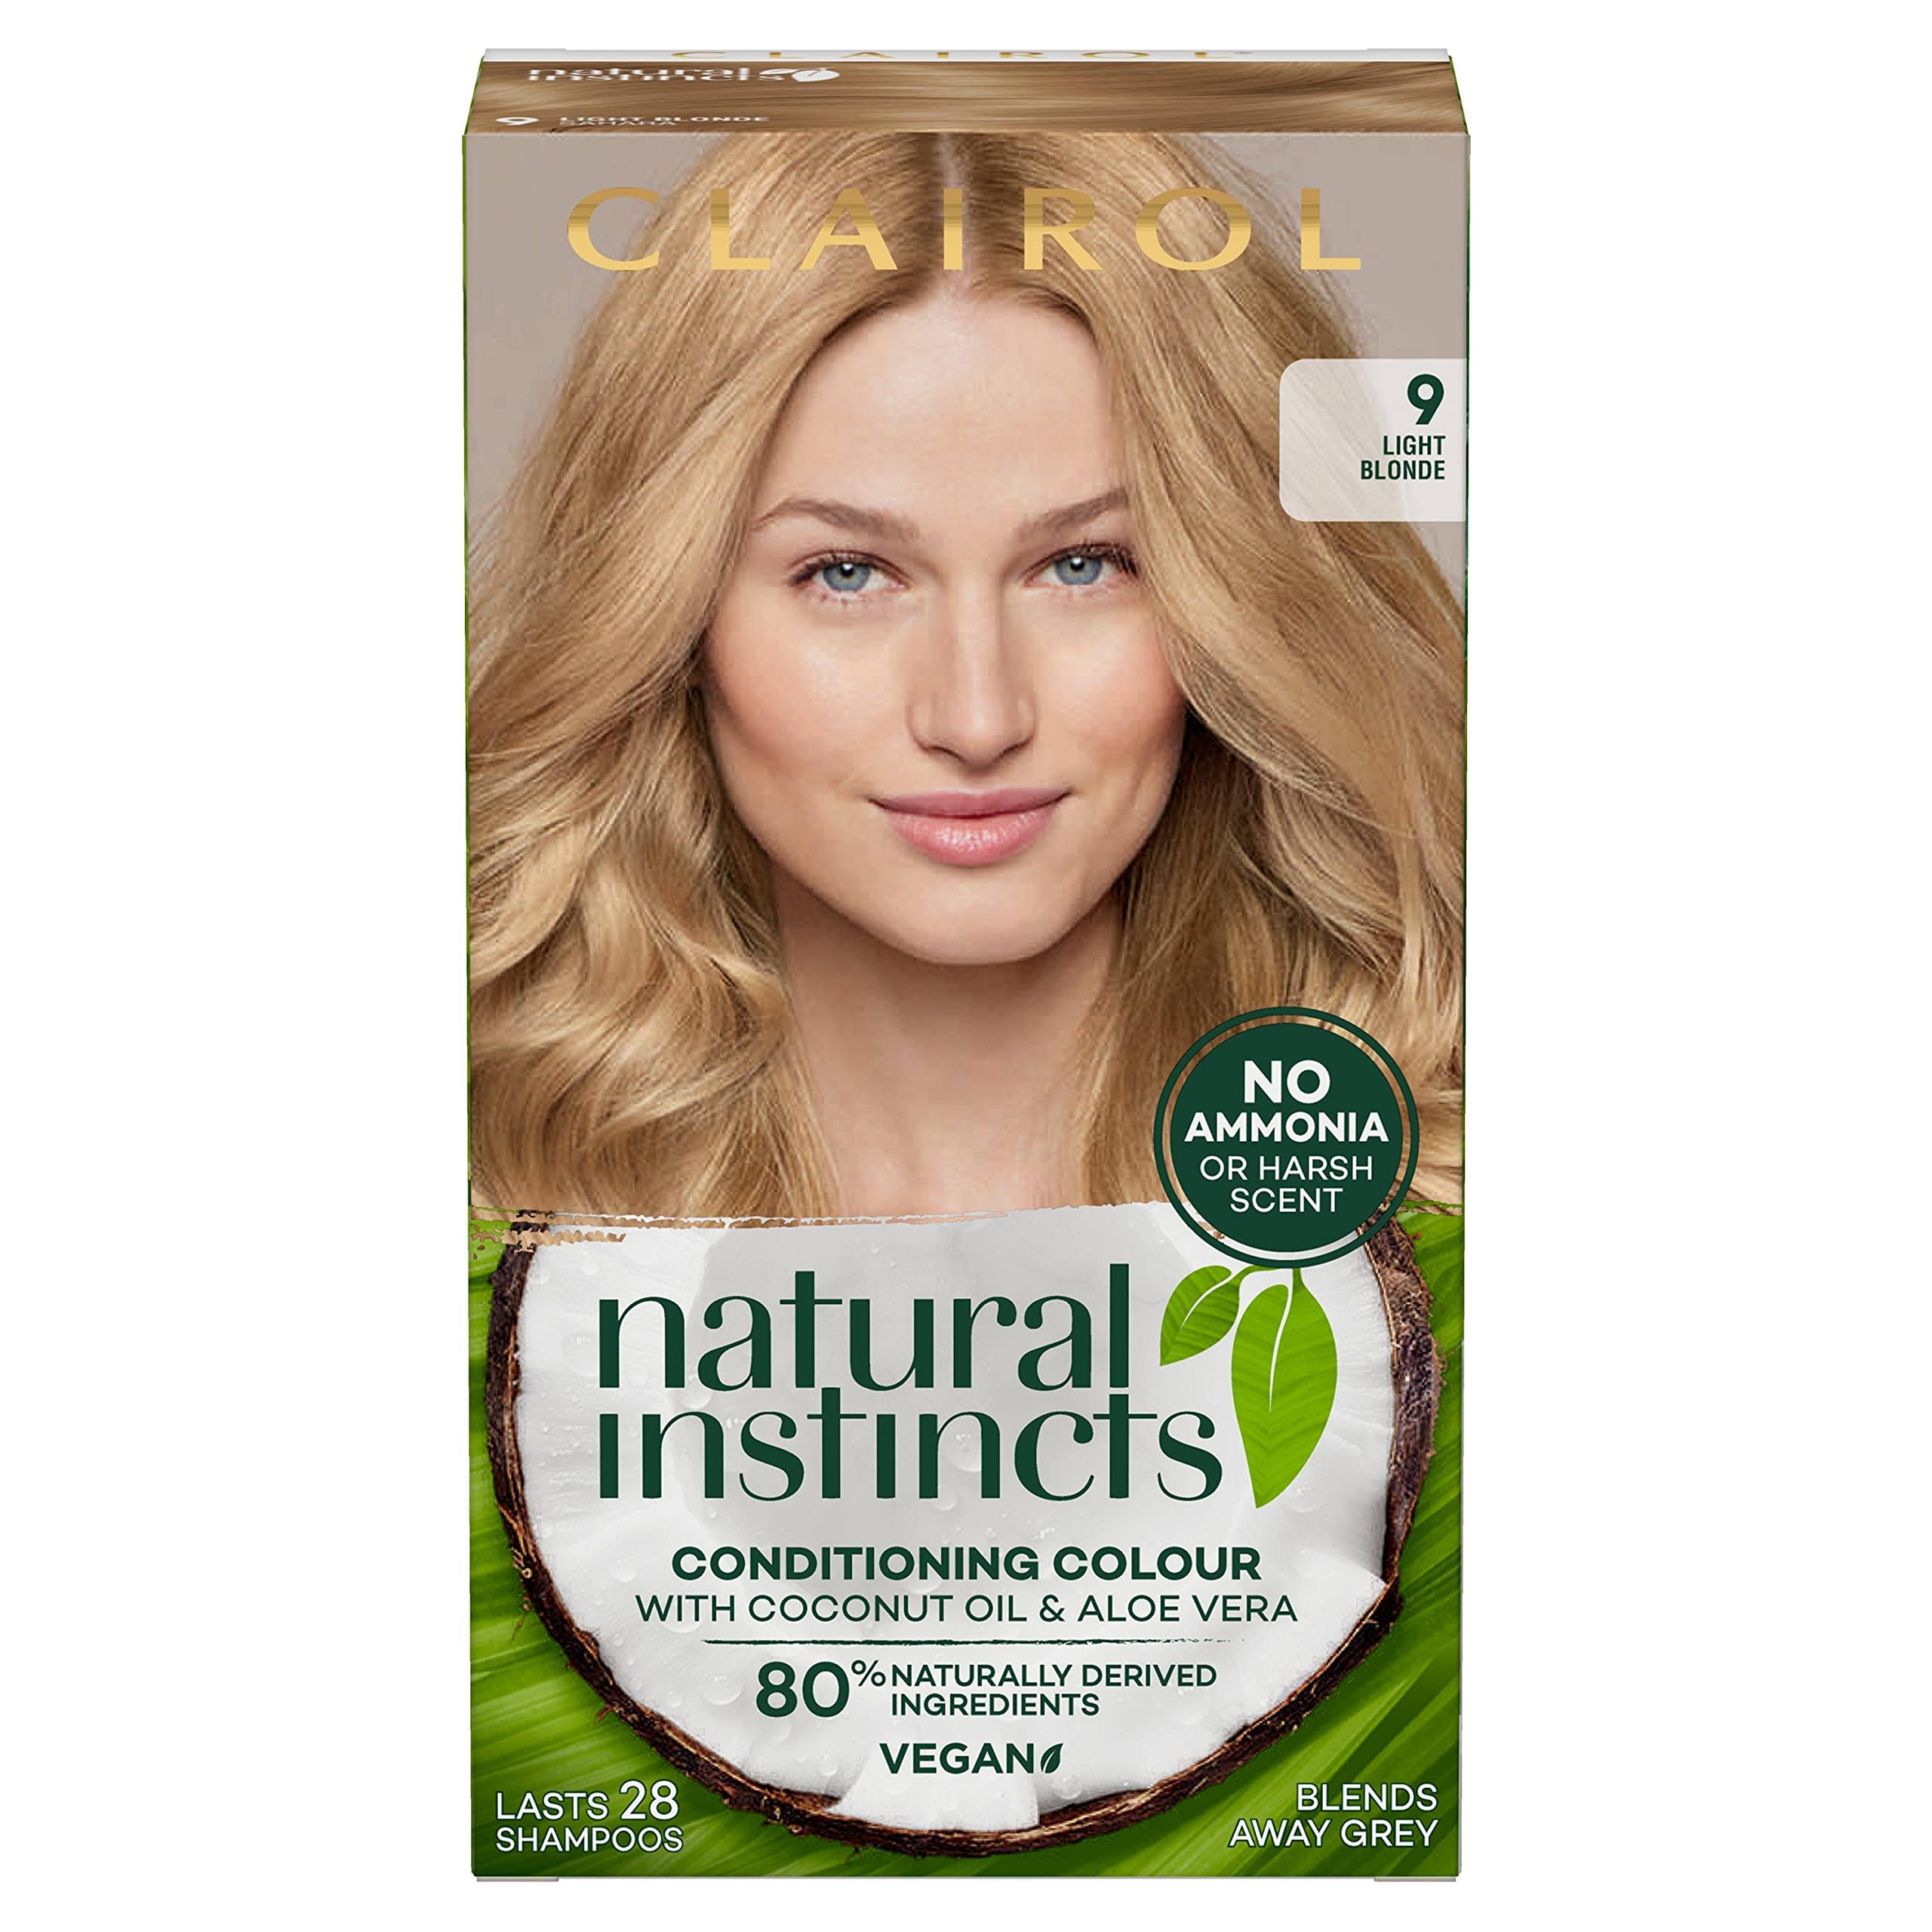 Clairol Natural Instincts Semi-Permanent No Ammonia Radiant At-Home Hair Dye, First Greys Coverage Up to 28 Washes, Colour: 9 Light Blonde